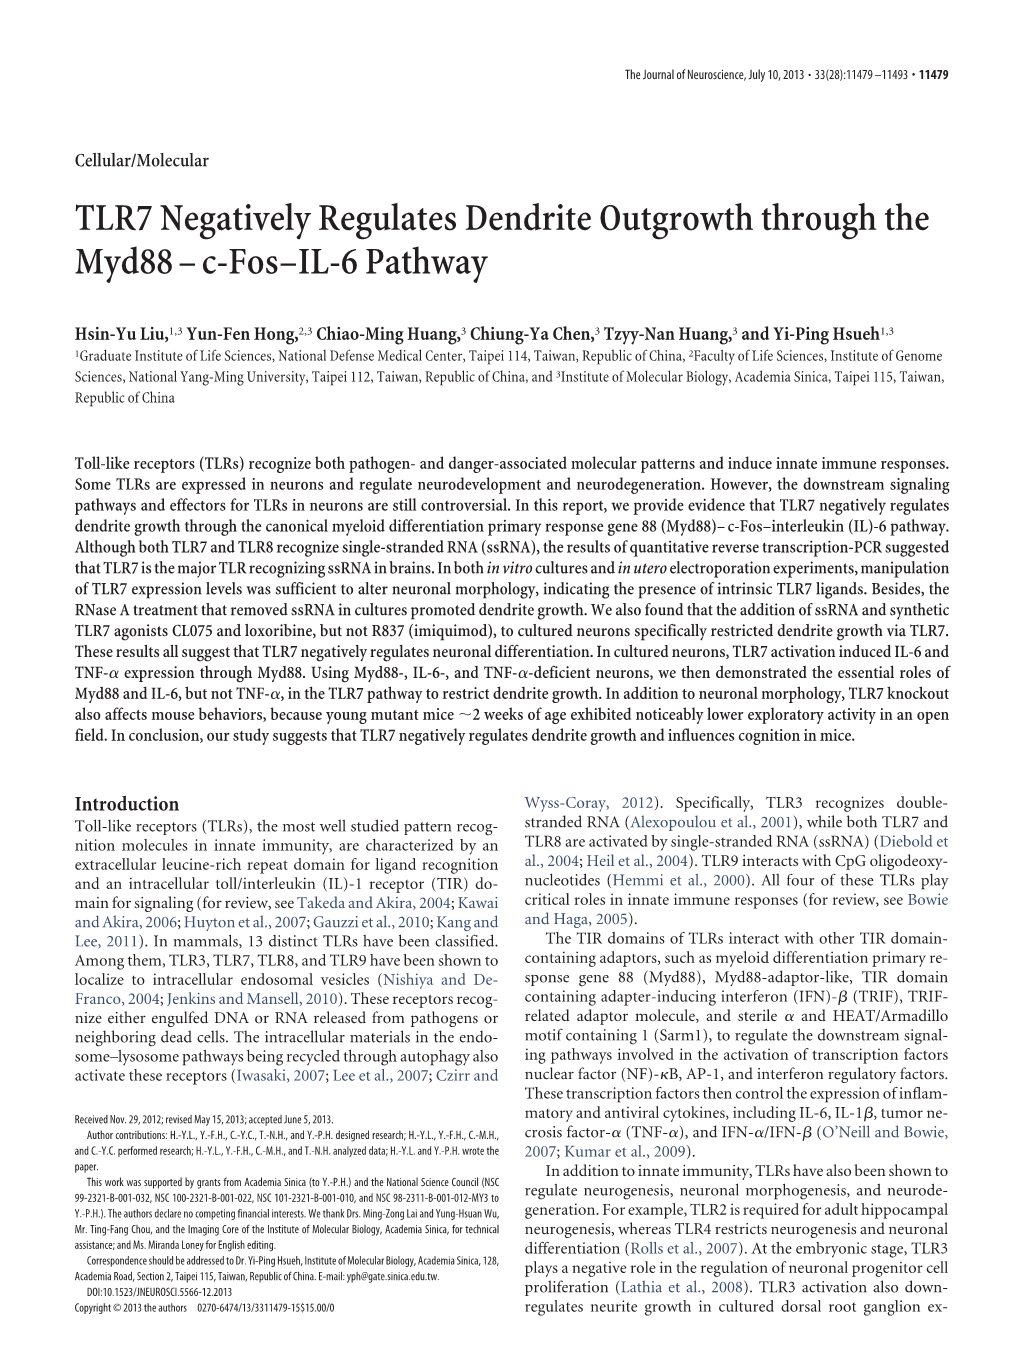 TLR7 Negatively Regulates Dendrite Outgrowth Through the Myd88–C-Fos–IL-6 Pathway